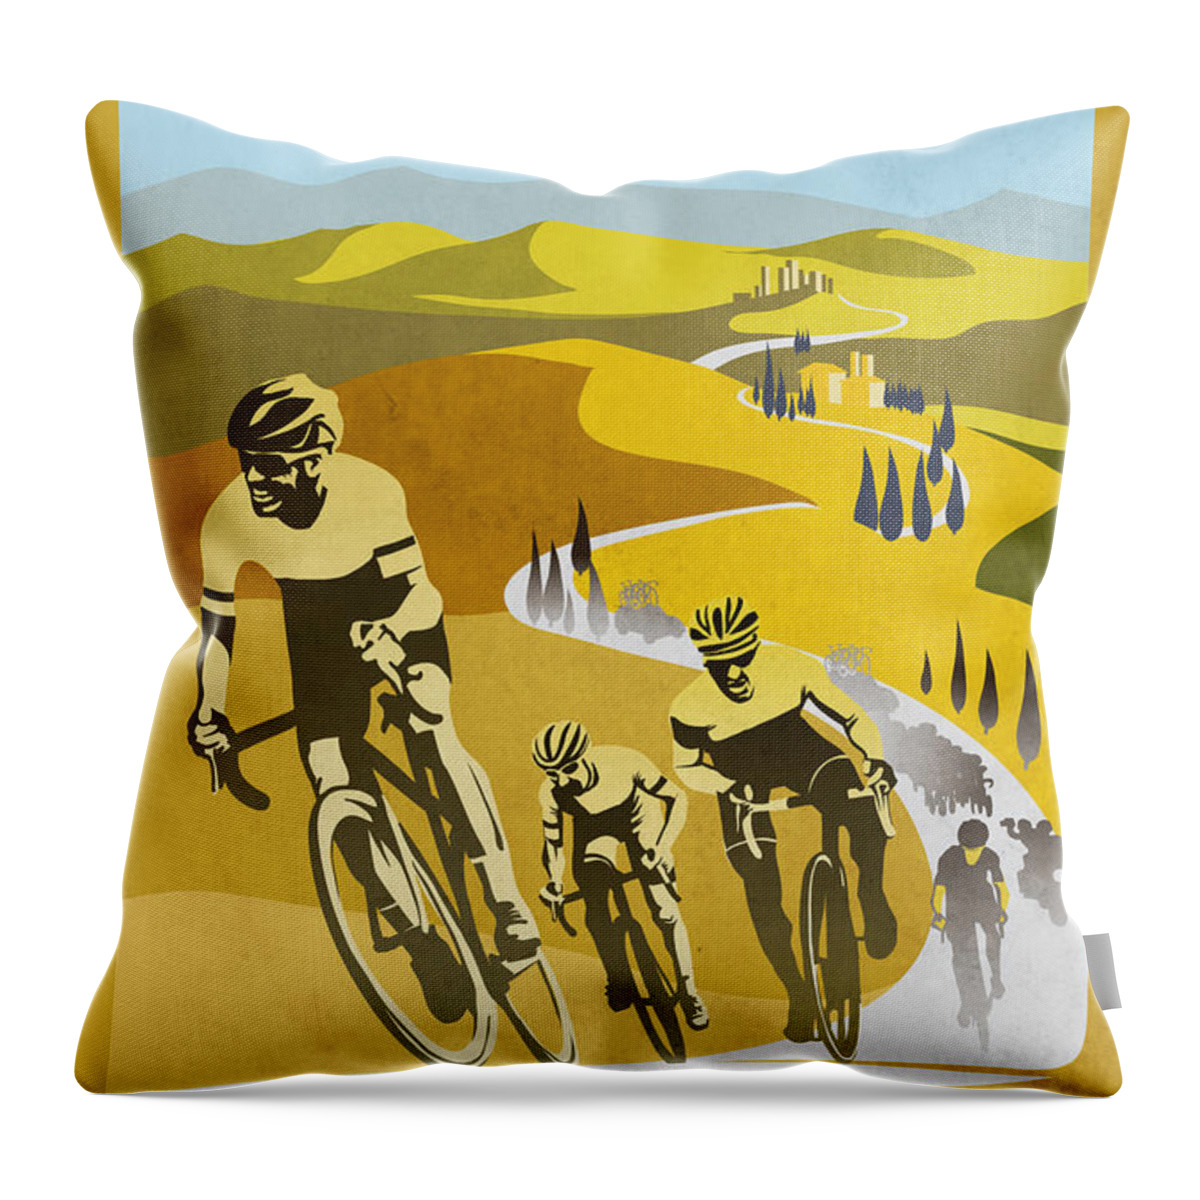 Vintage Cycling Throw Pillow featuring the painting Print by Sassan Filsoof